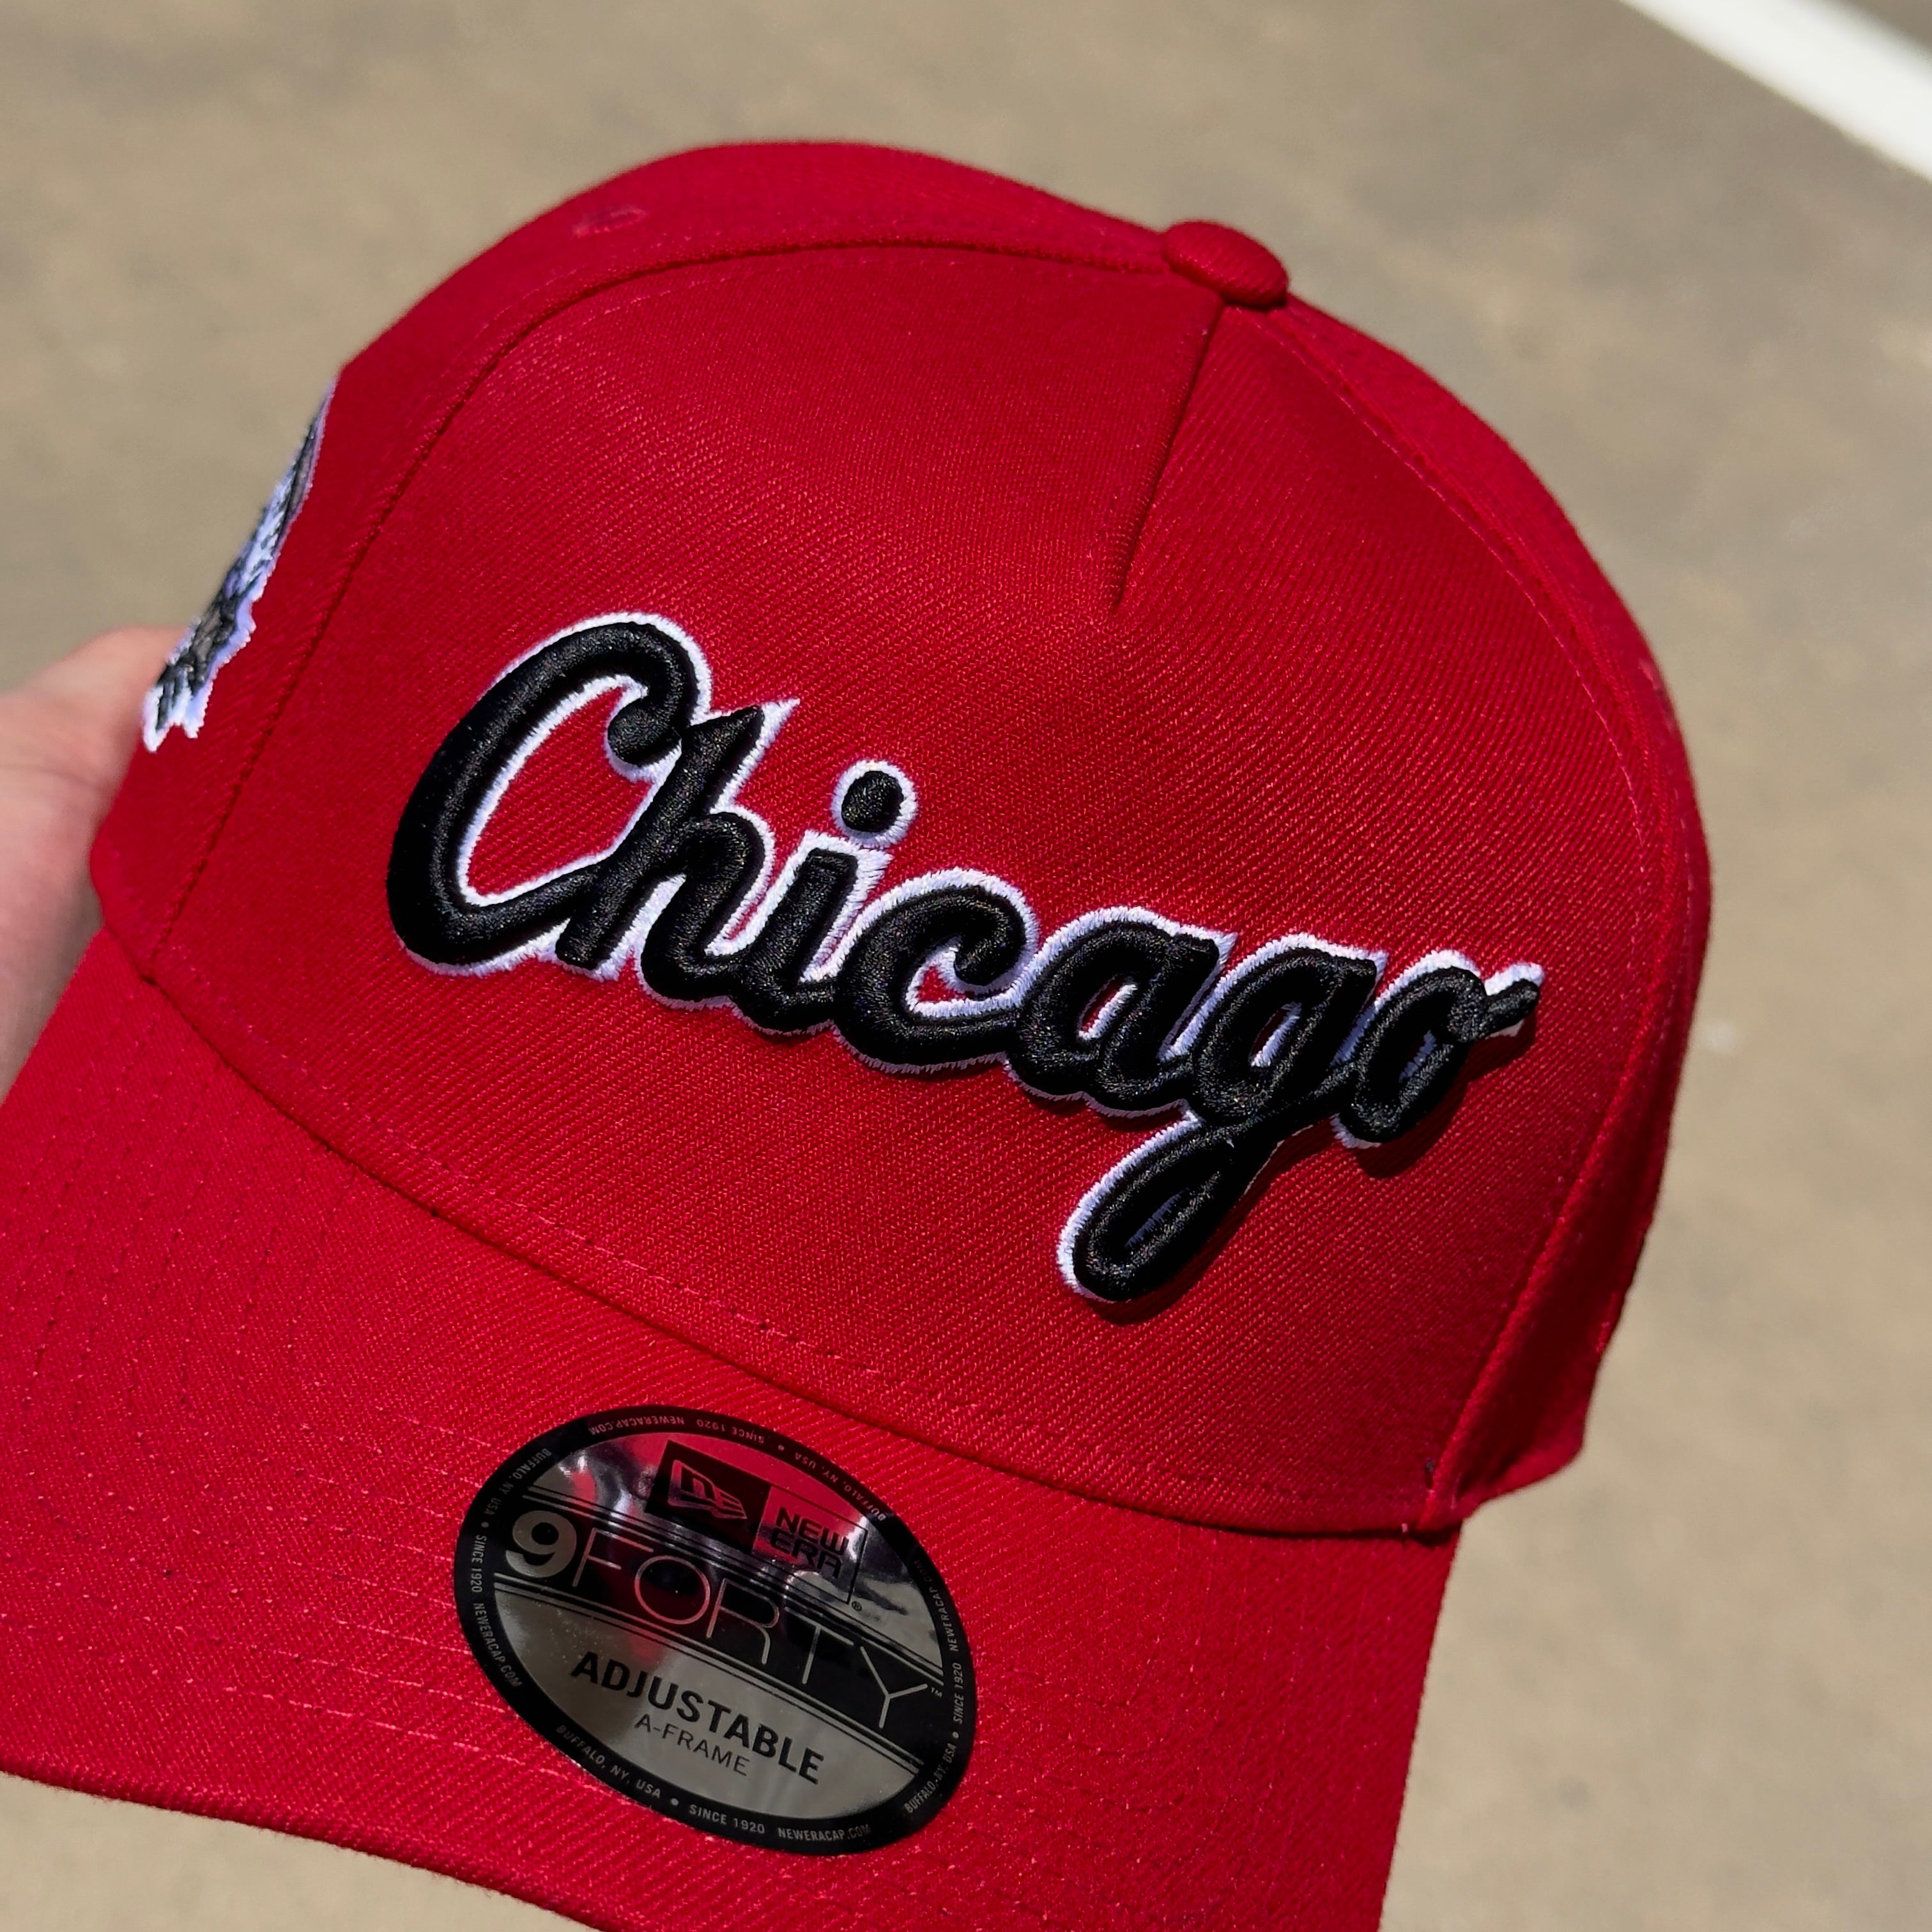 NEW Red Chicago White Sox Comiskey Park New Era 9Fifty Adjustable One Size A-Frame